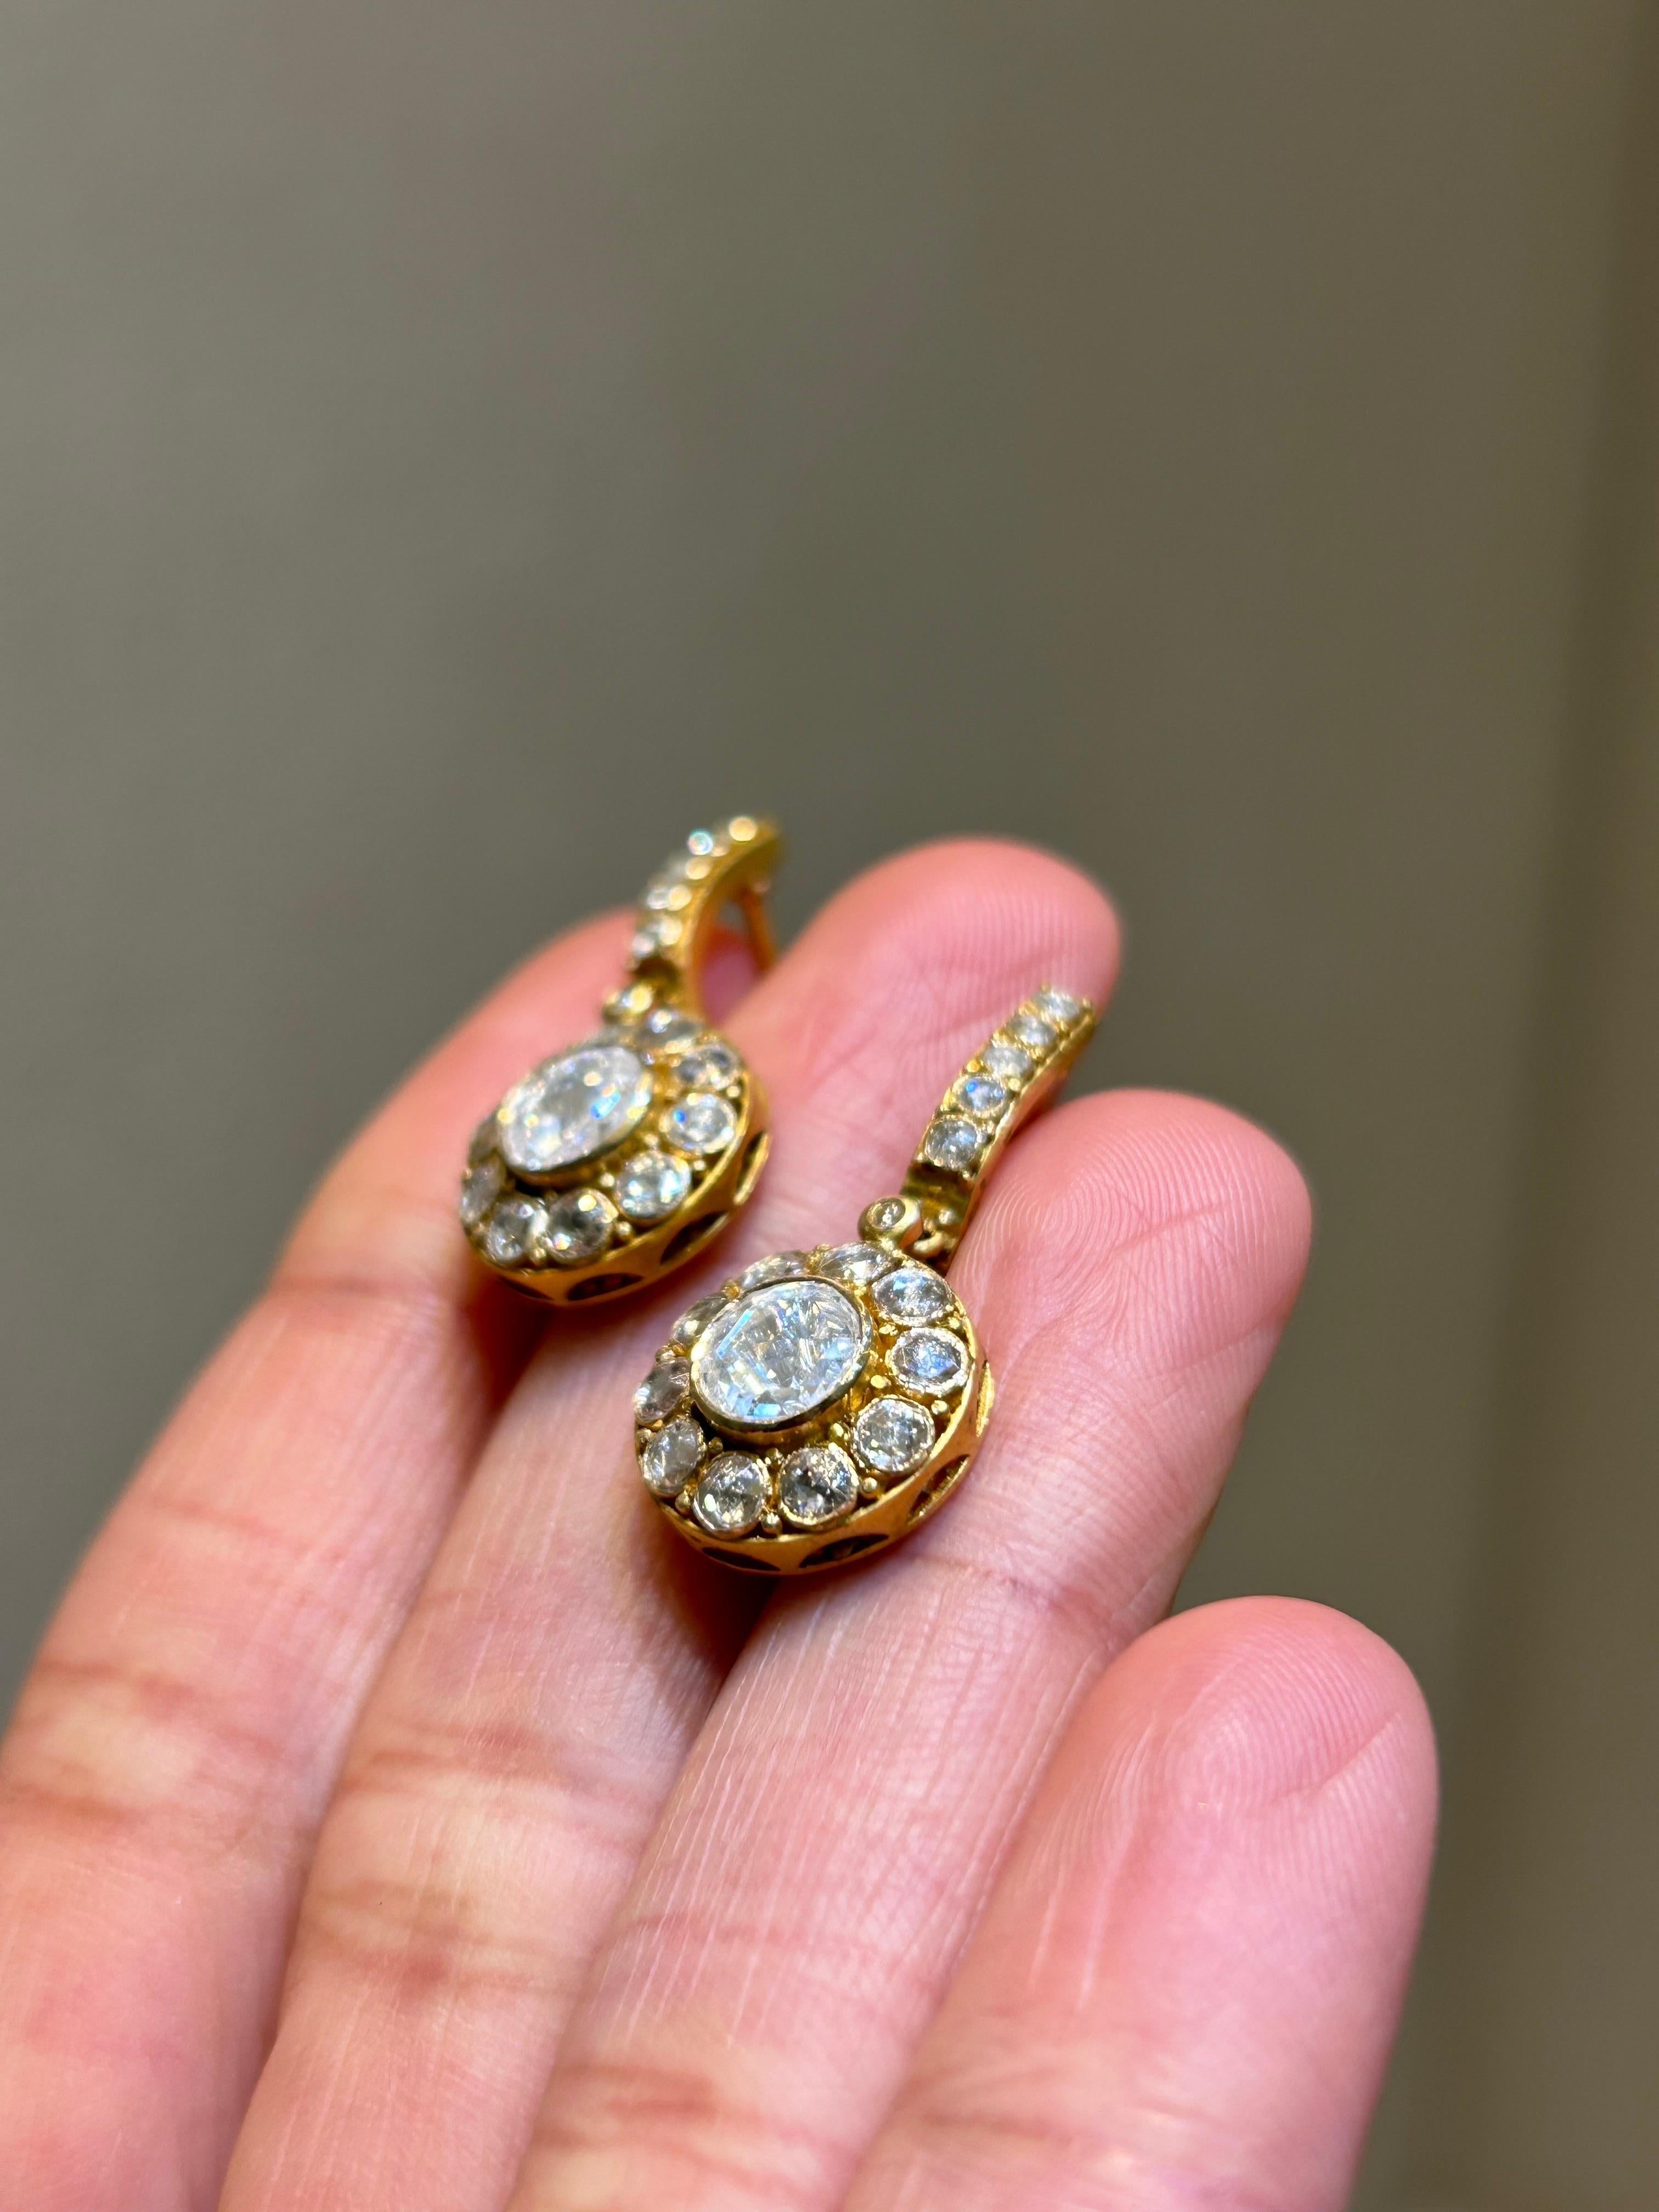 An antique looking 2.03 carat total Diamond dangle earrings, set in solid 18K Yellow Gold. The center piece rose cute diamonds weigh 1.11 carat (around 0.55ct each), with smaller size rose cut diamonds surrounding it. These earrings are beautifully